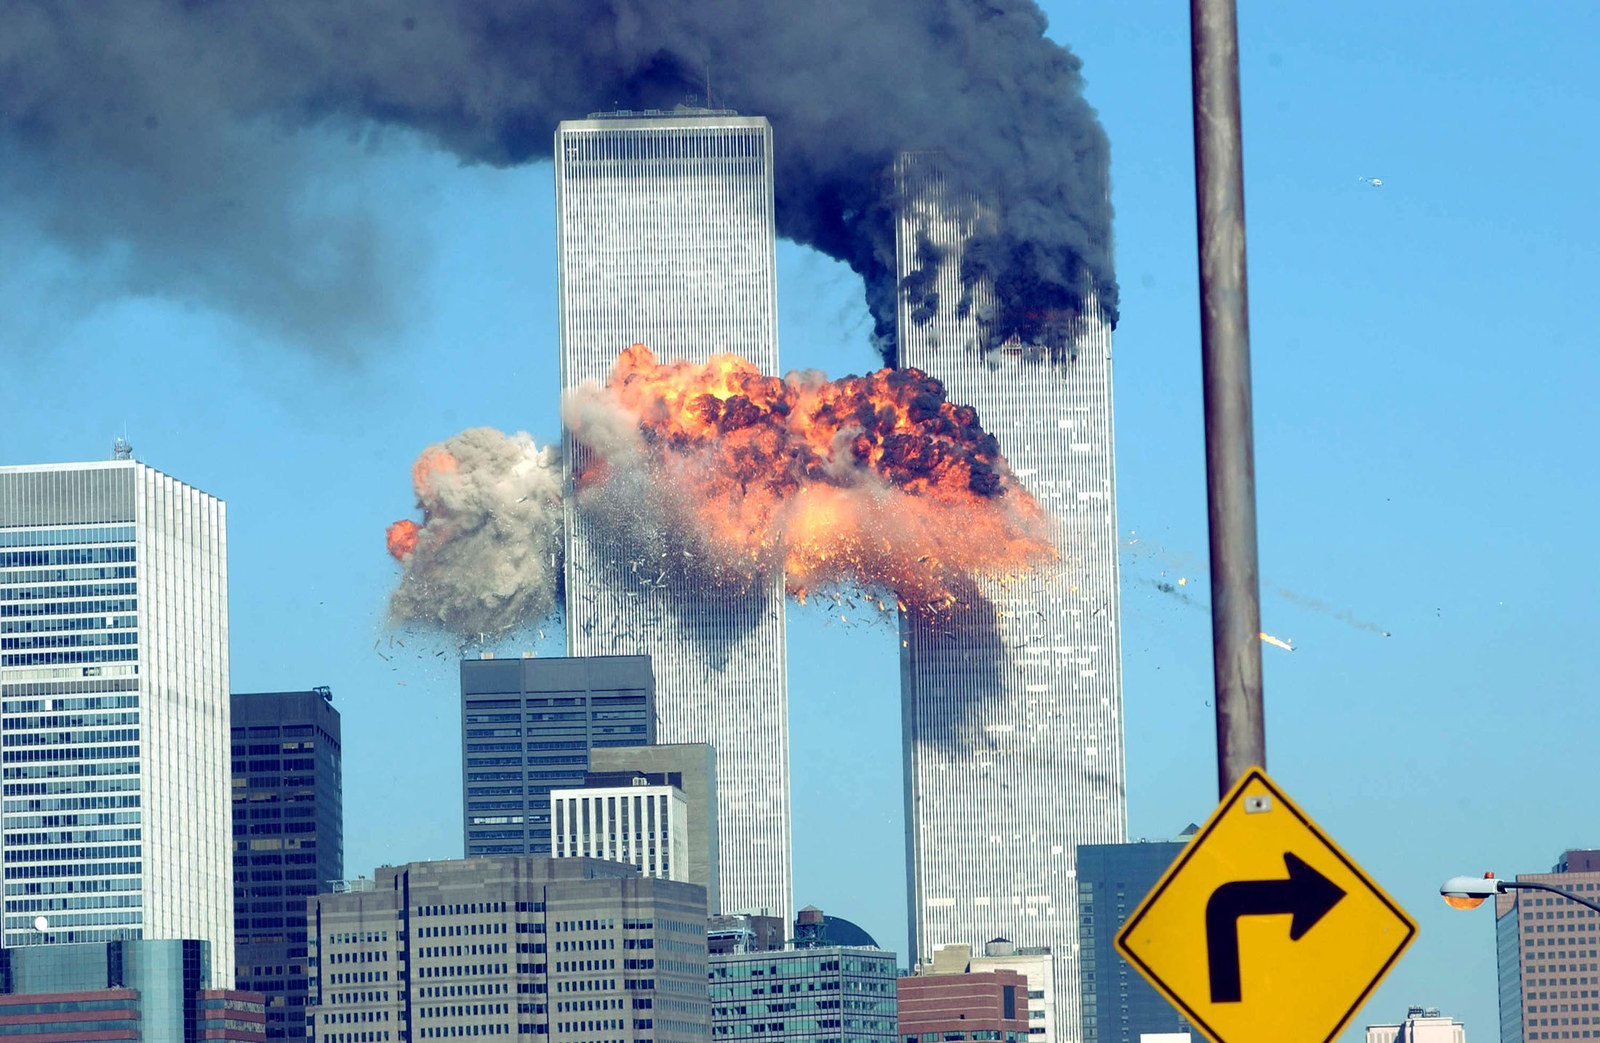 30 Harrowing Pictures From The 9/11 Terrorist Attacks